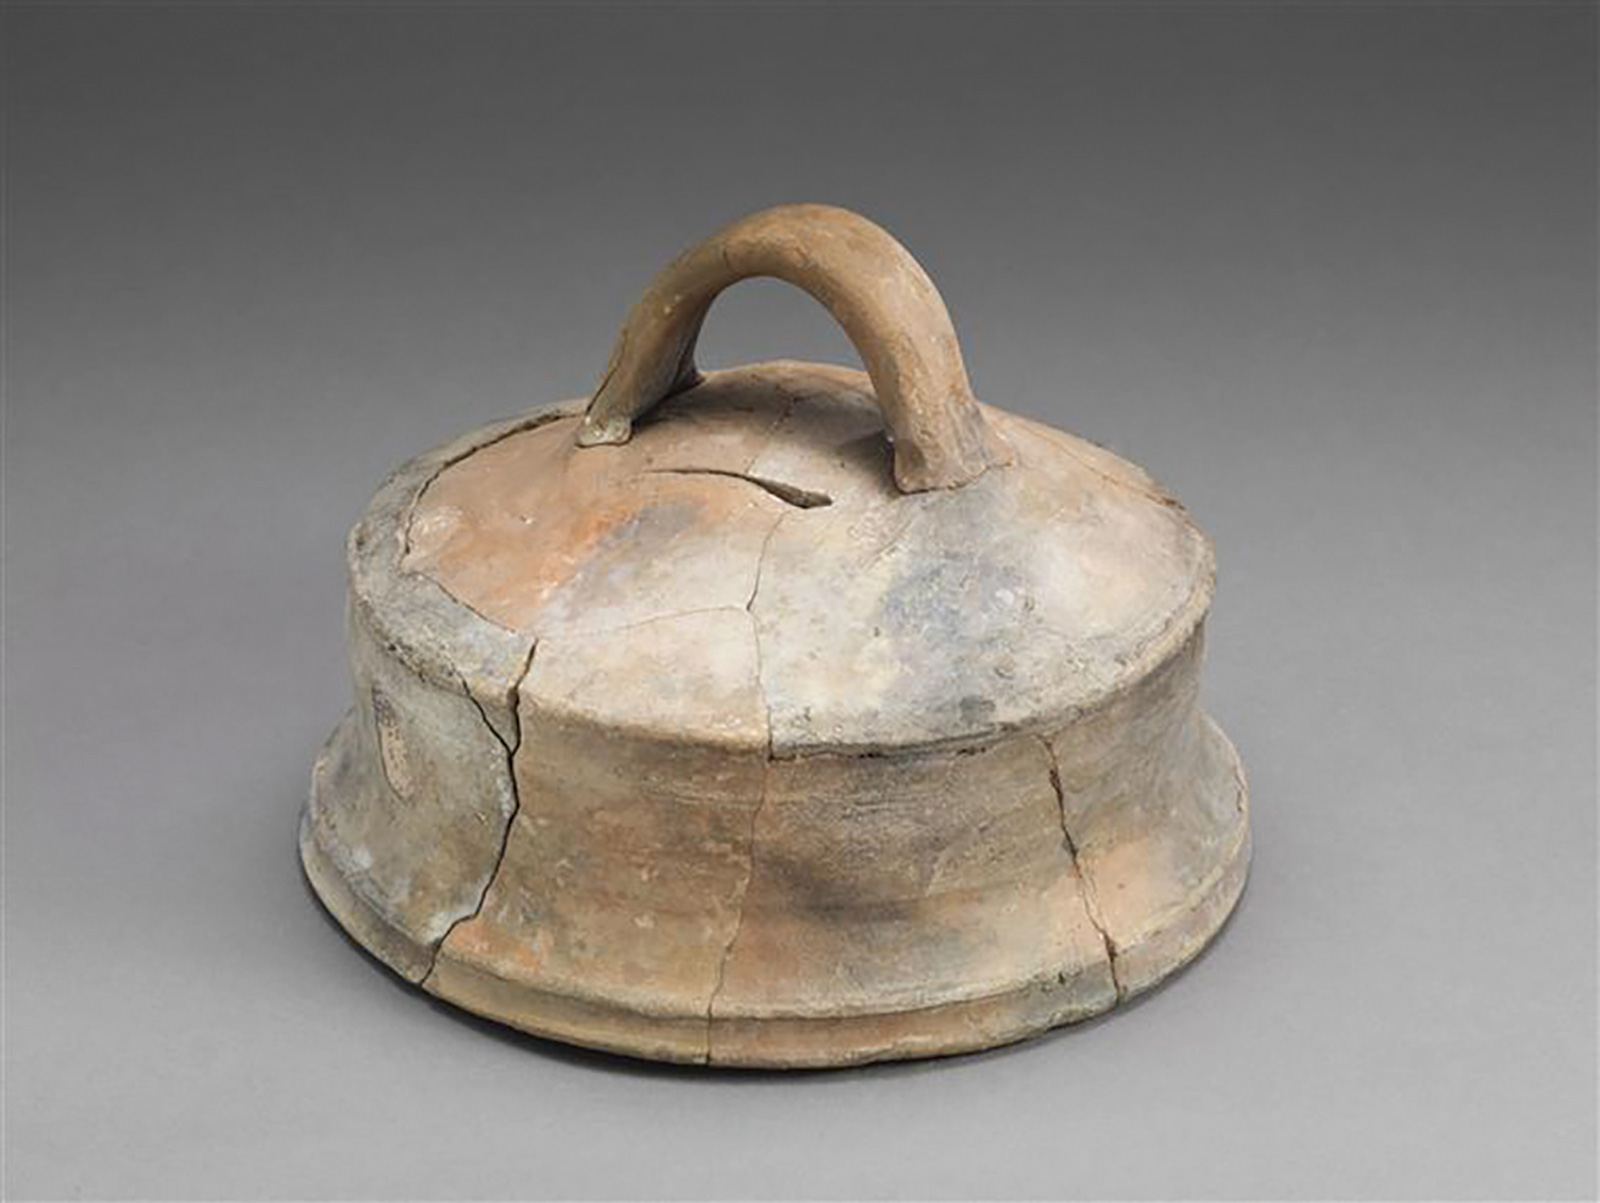 A photograph of an undated couvre-feu, a dome-shaped earthen lid. This couvre-feu is cracked.